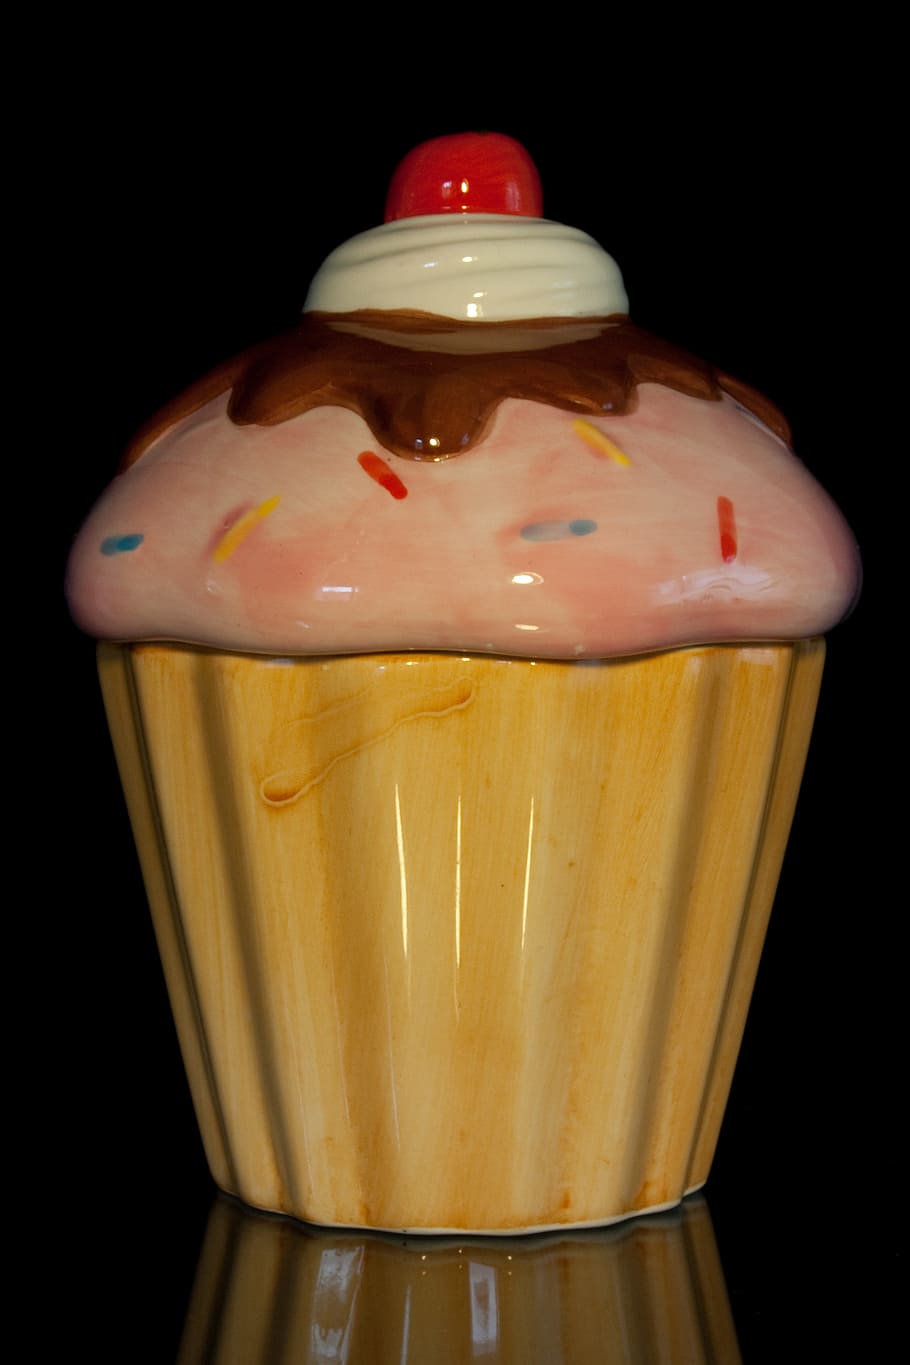 Cupcake, Ceramic, Art, Art, Pottery, Painting, ceramic, art, pottery, colorful, vessels, painted